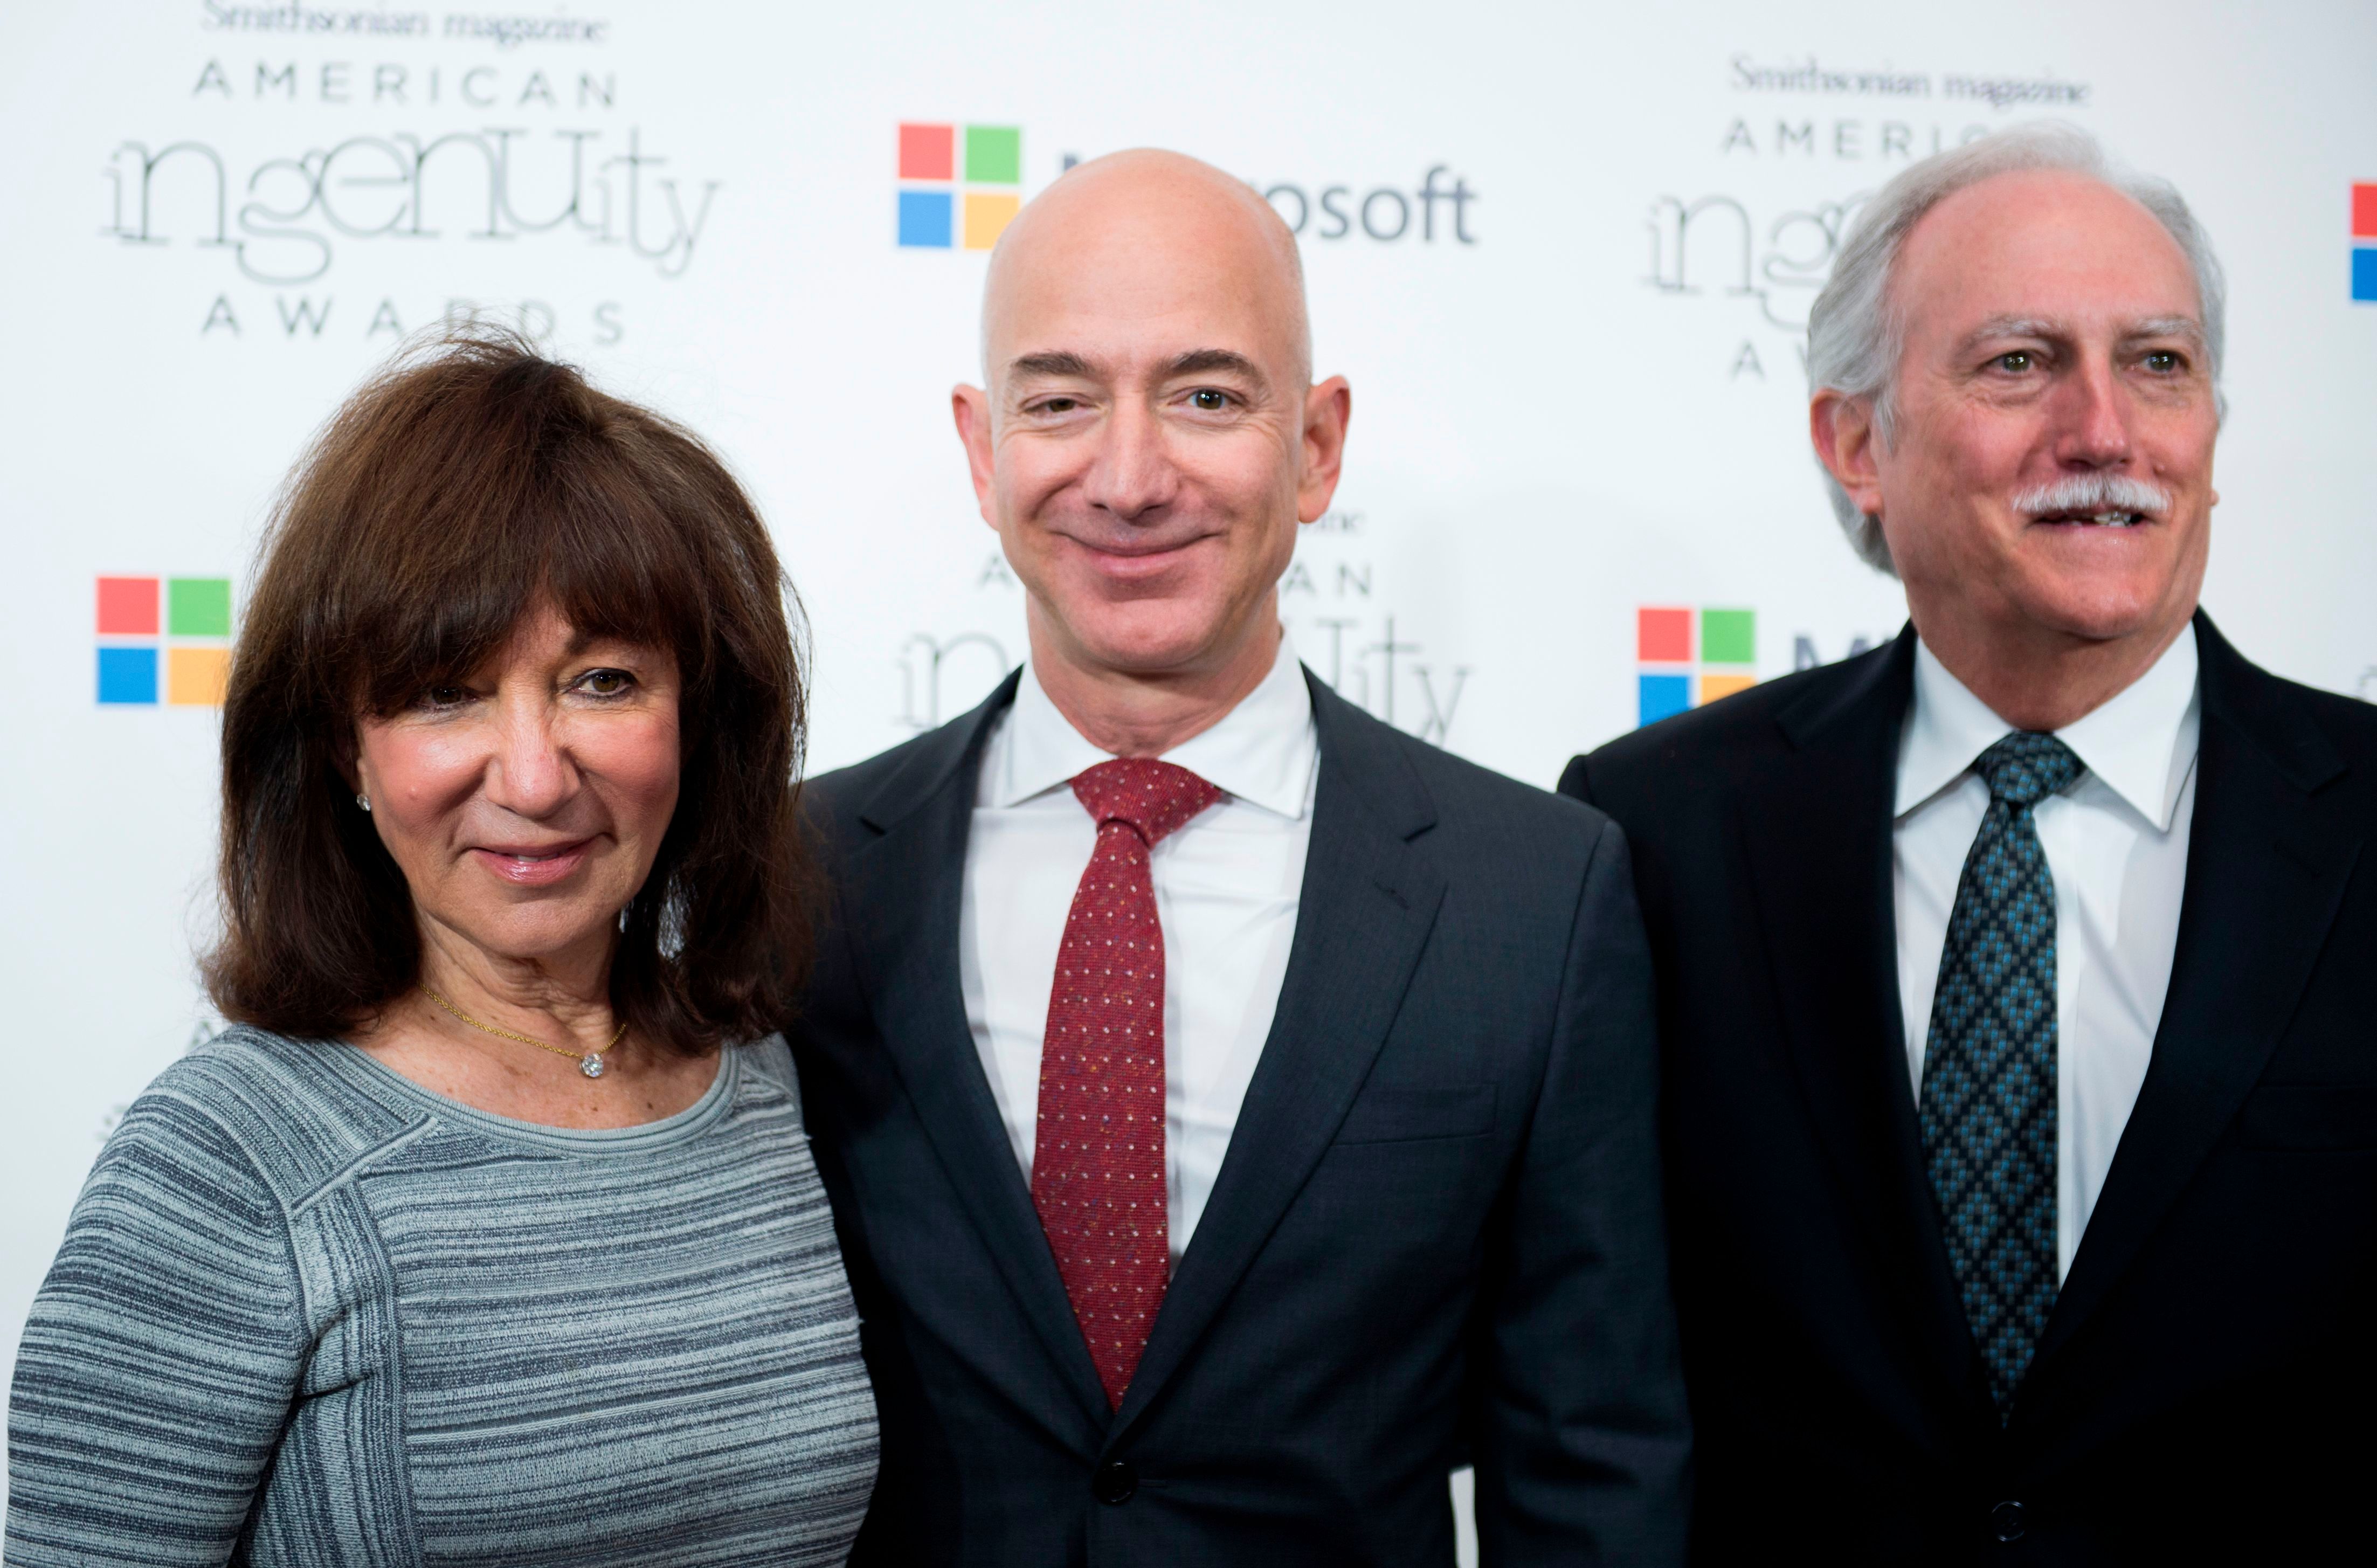 Miguel Bezos(left) with his son Jeff Bezos(middle) and wife Jacklyn Gise(right)